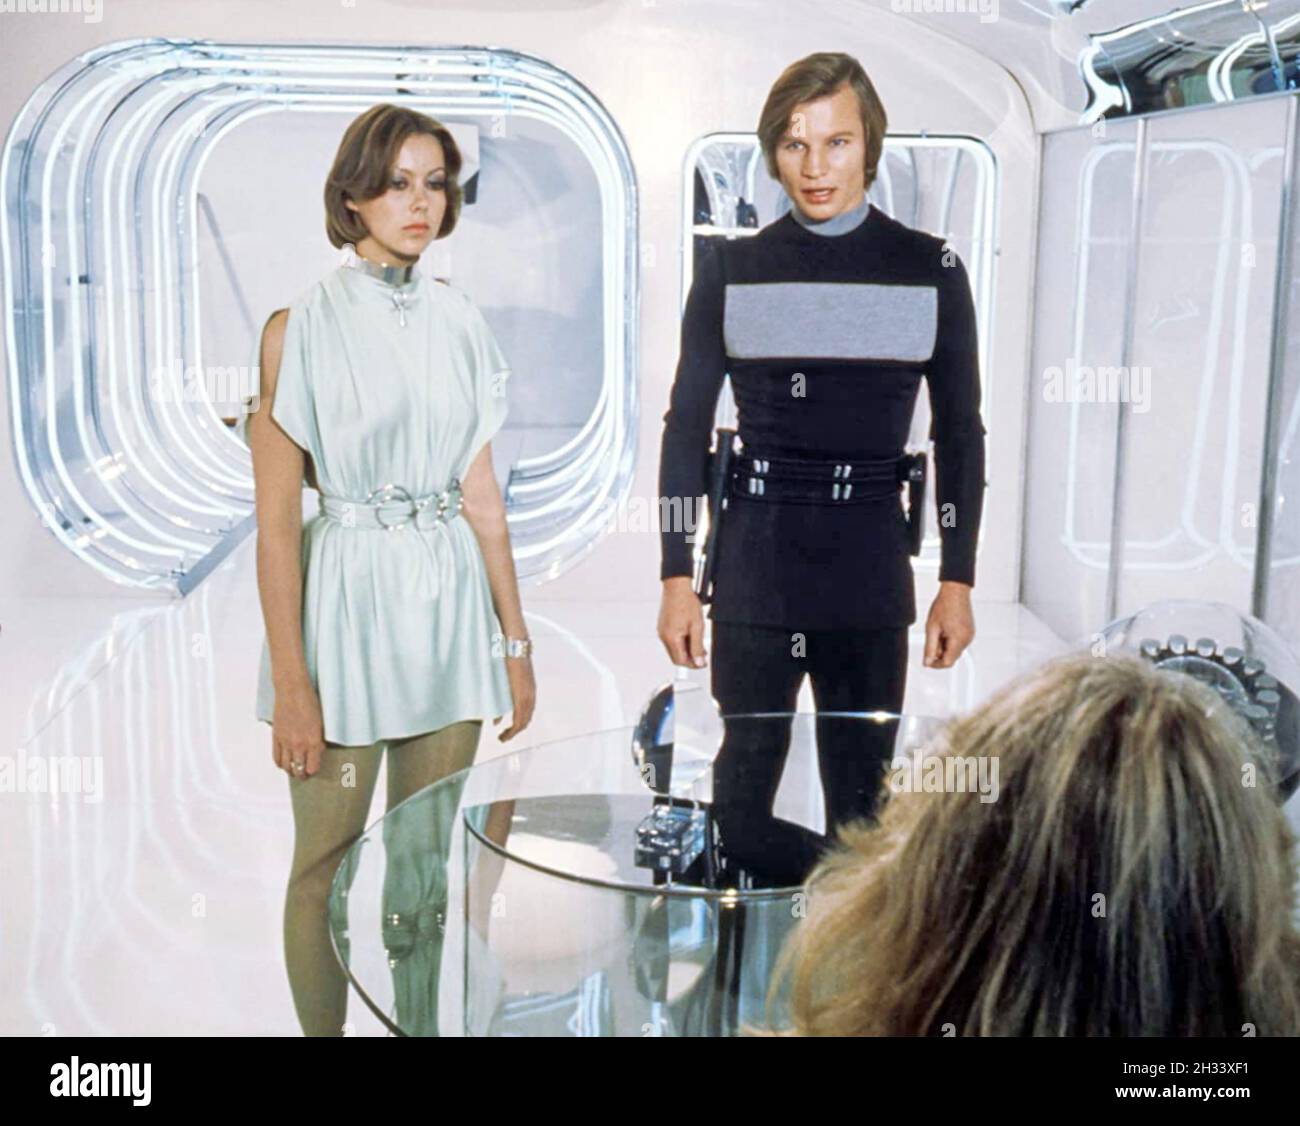 LOGAN'S RUN 1976 United Artists sci-fi film with Michael York and Jenny Agutter Stock Photo